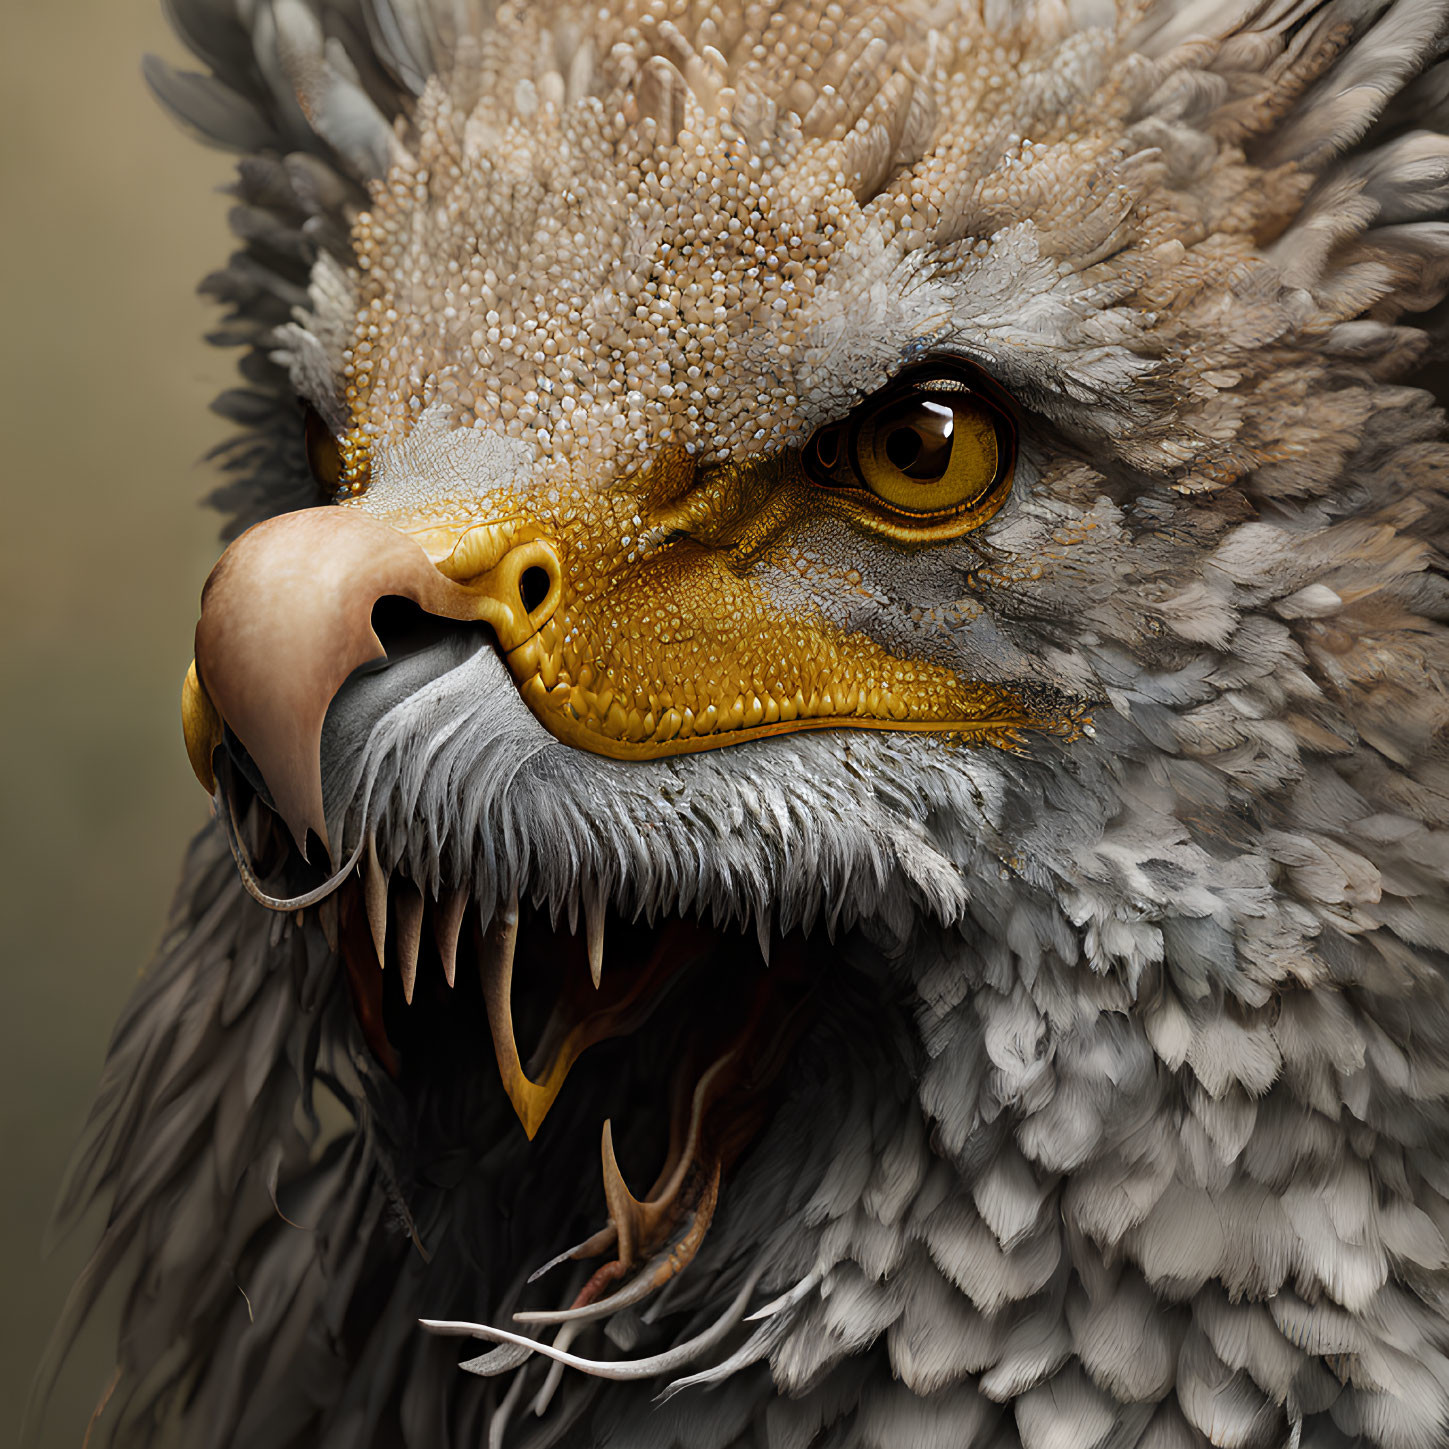 Fantastical creature with eagle beak and yellow eyes